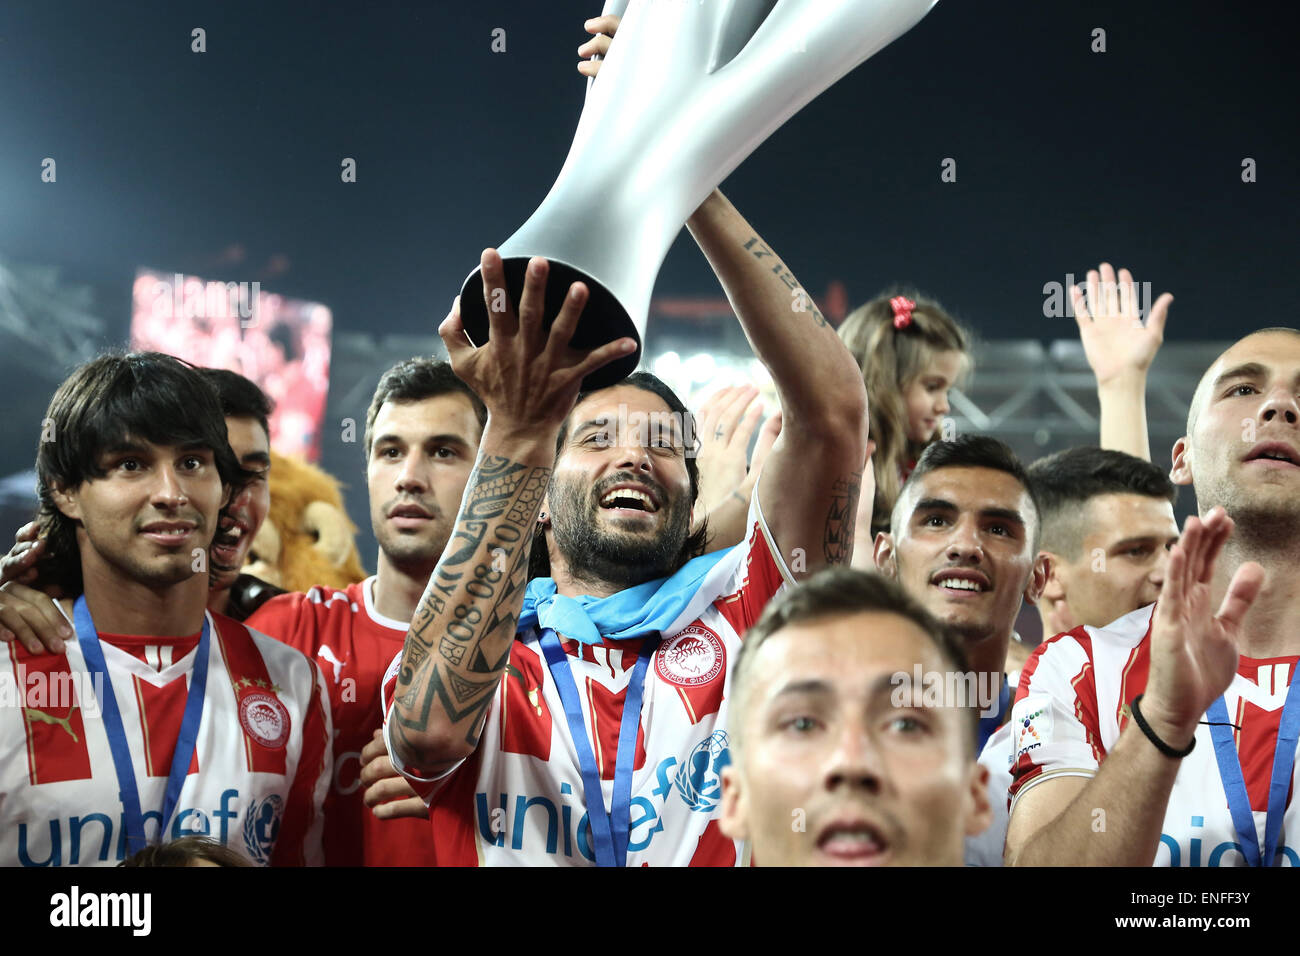 Athens, Greece. 03rd May, 2015. Award ceremony for winning the 42nd championship by Olympiacos FC. This year is the 17th title in the last 19 years. At Faliro, near Athens on Sunday. © Panayiotis Tzamaros/Pacific Press/Alamy Live News Stock Photo